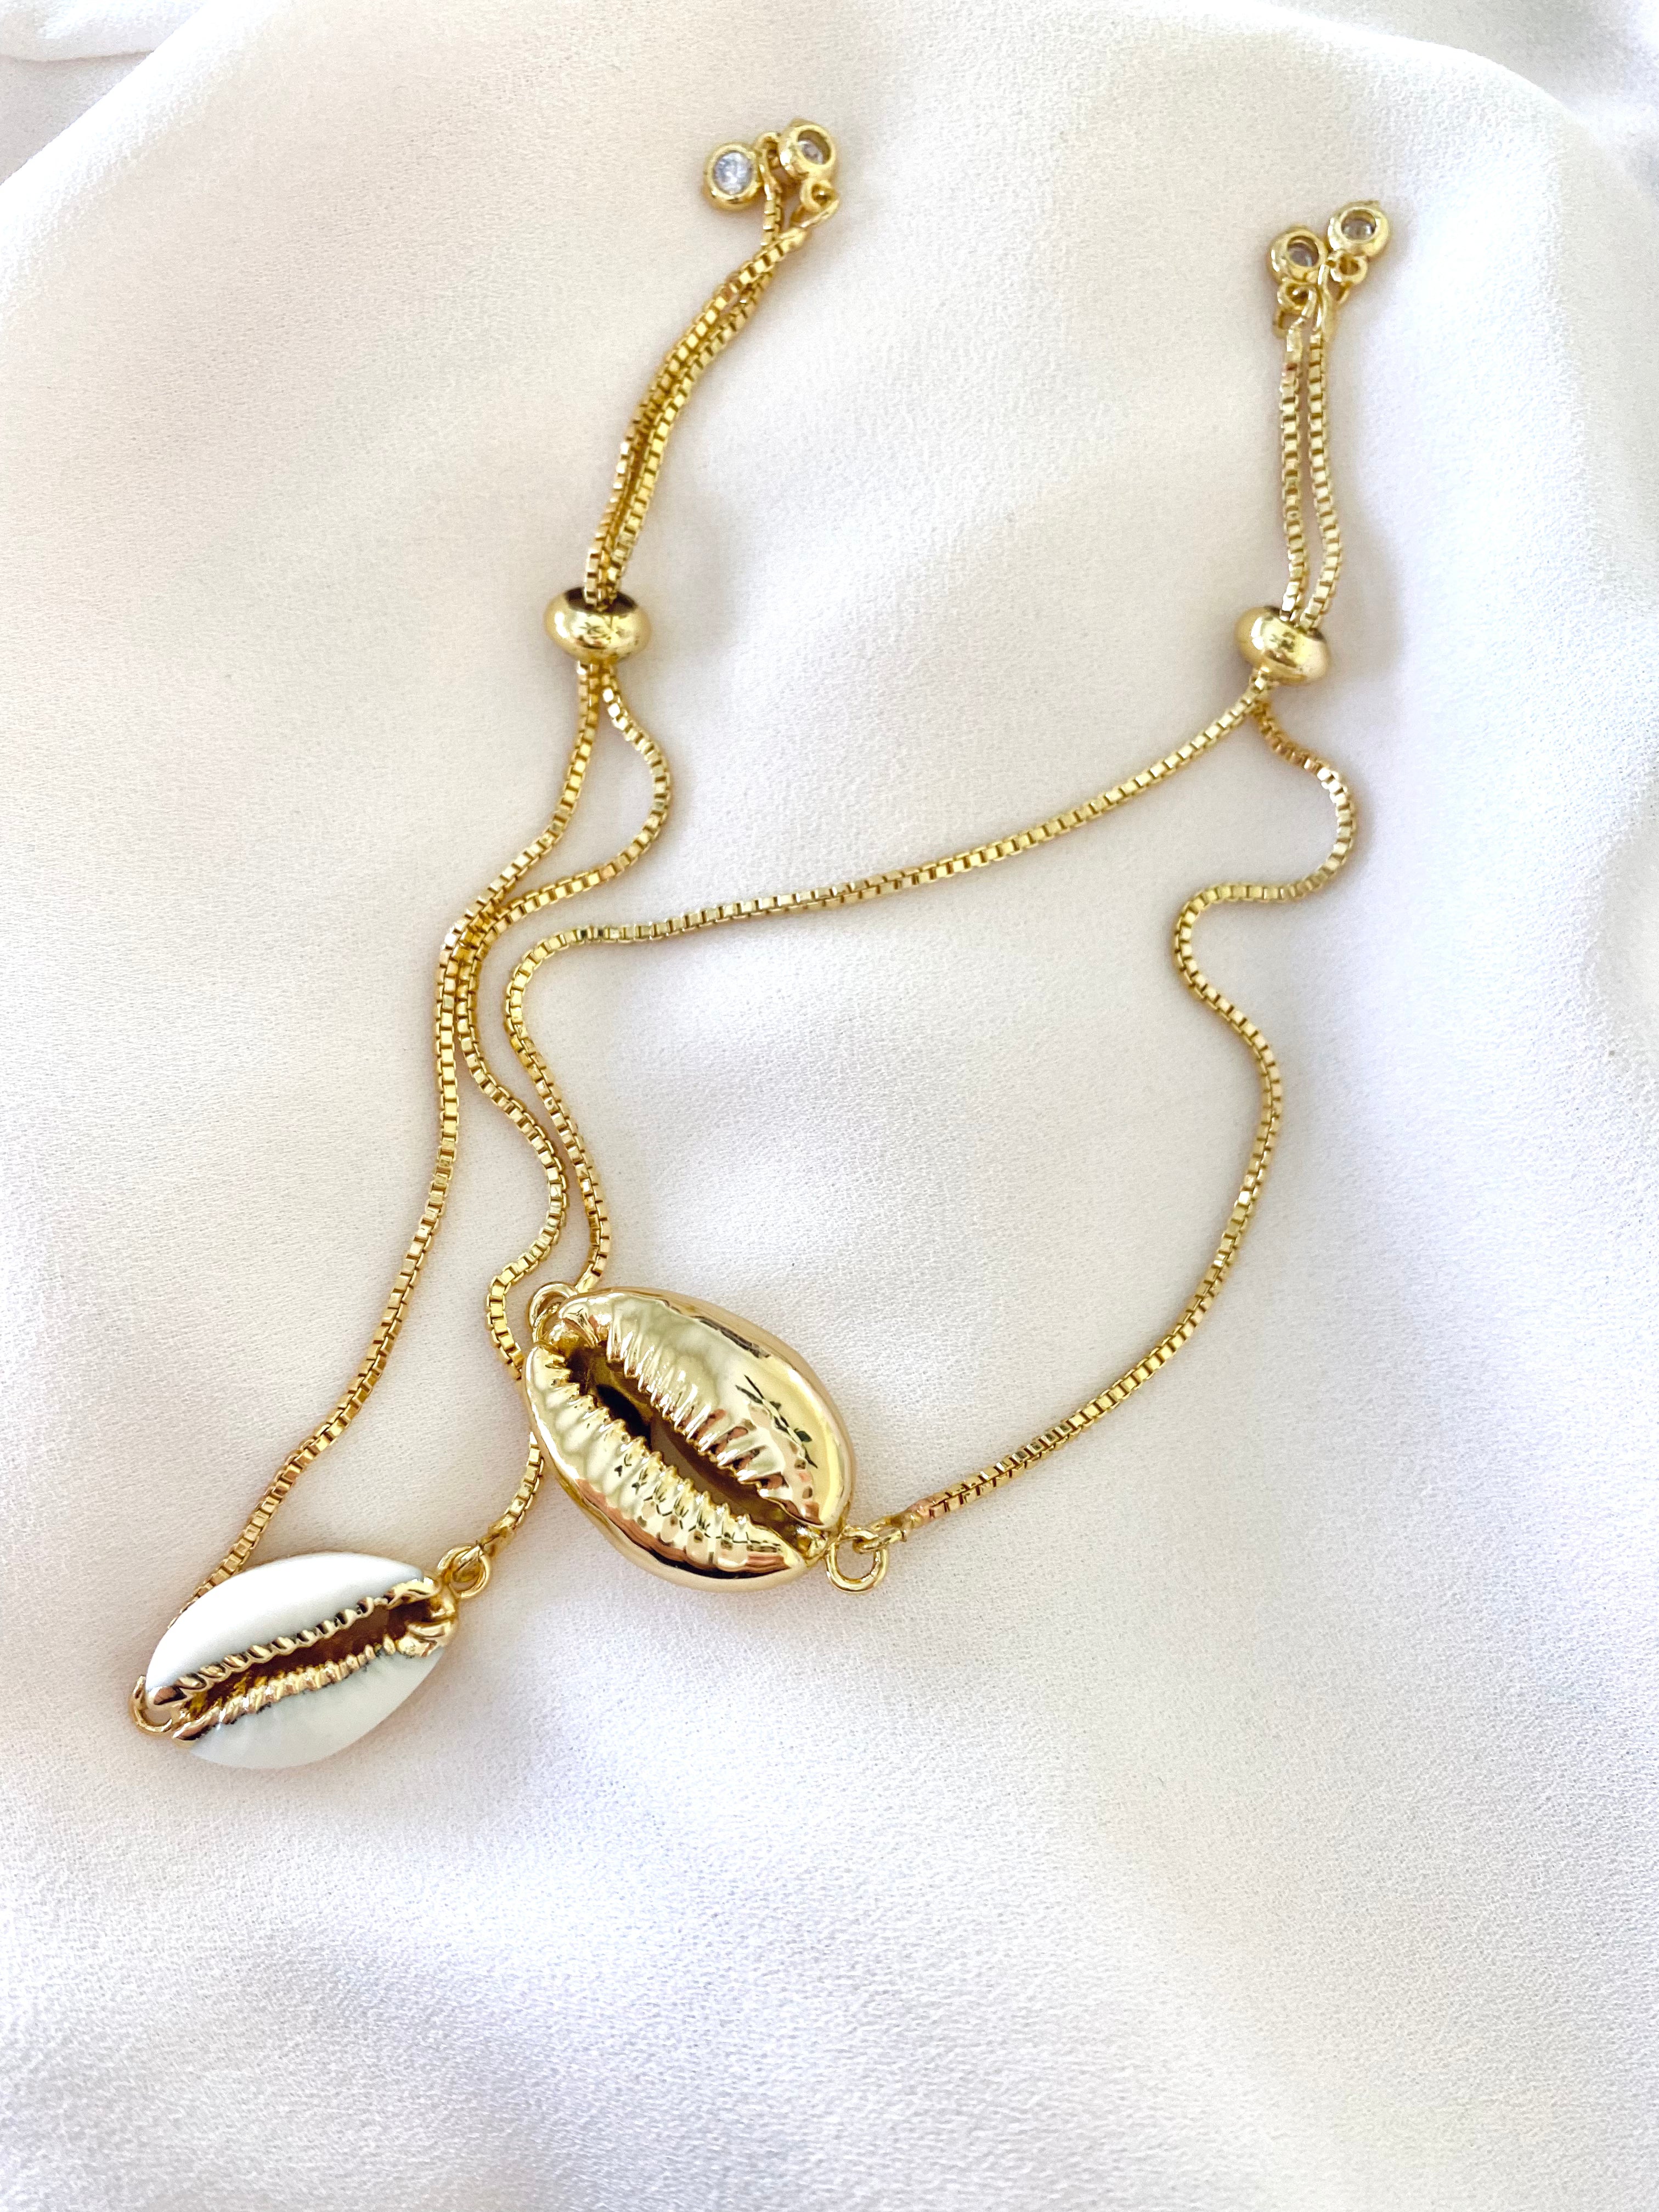 Genuine Cowrie Shell Gold Dipped Bracelet - Adjustable – The Cord Gallery